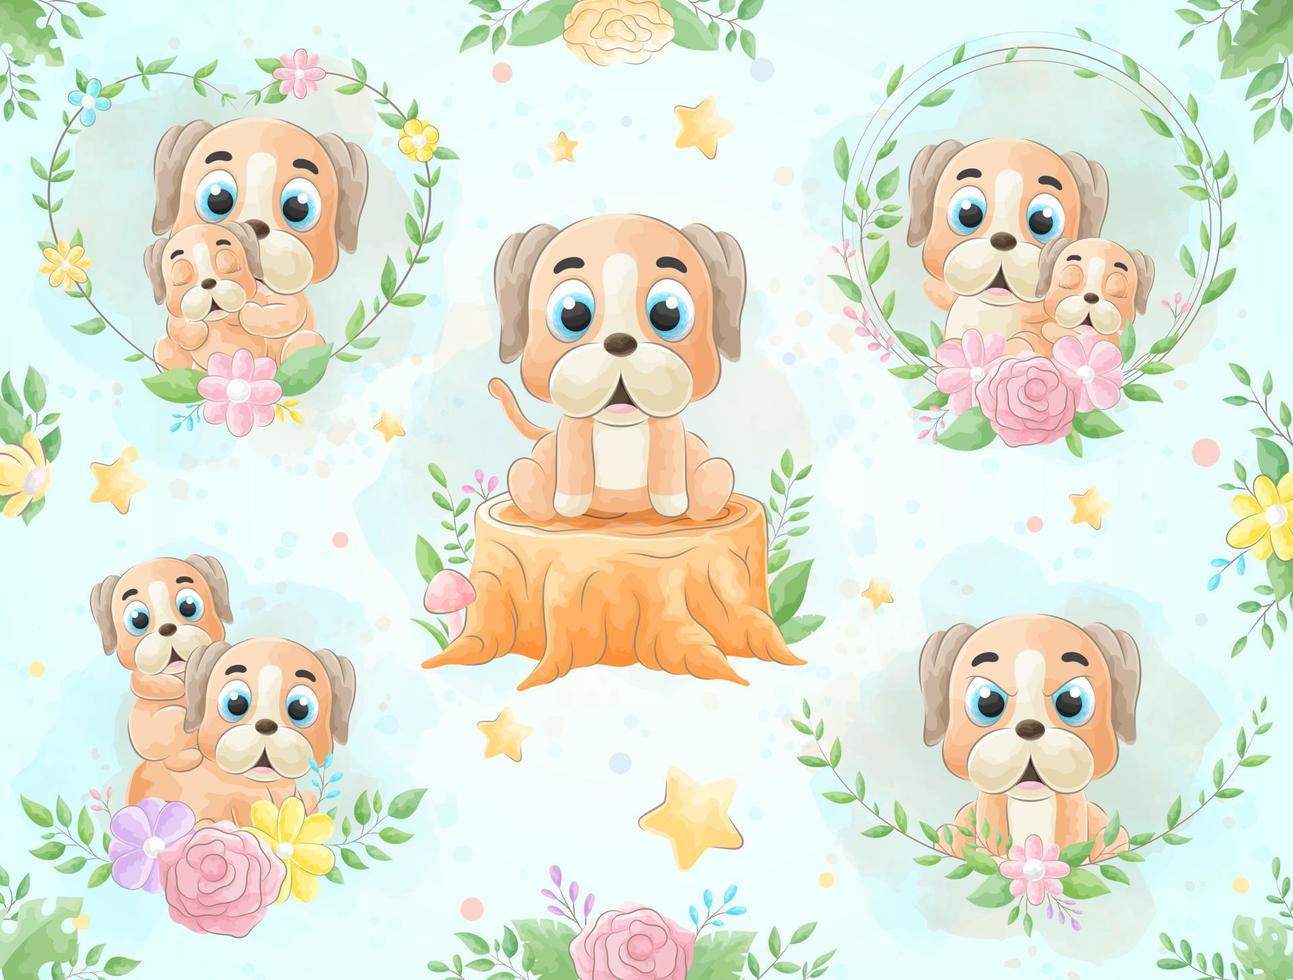 Cute little Dog with watercolor illustration set vector